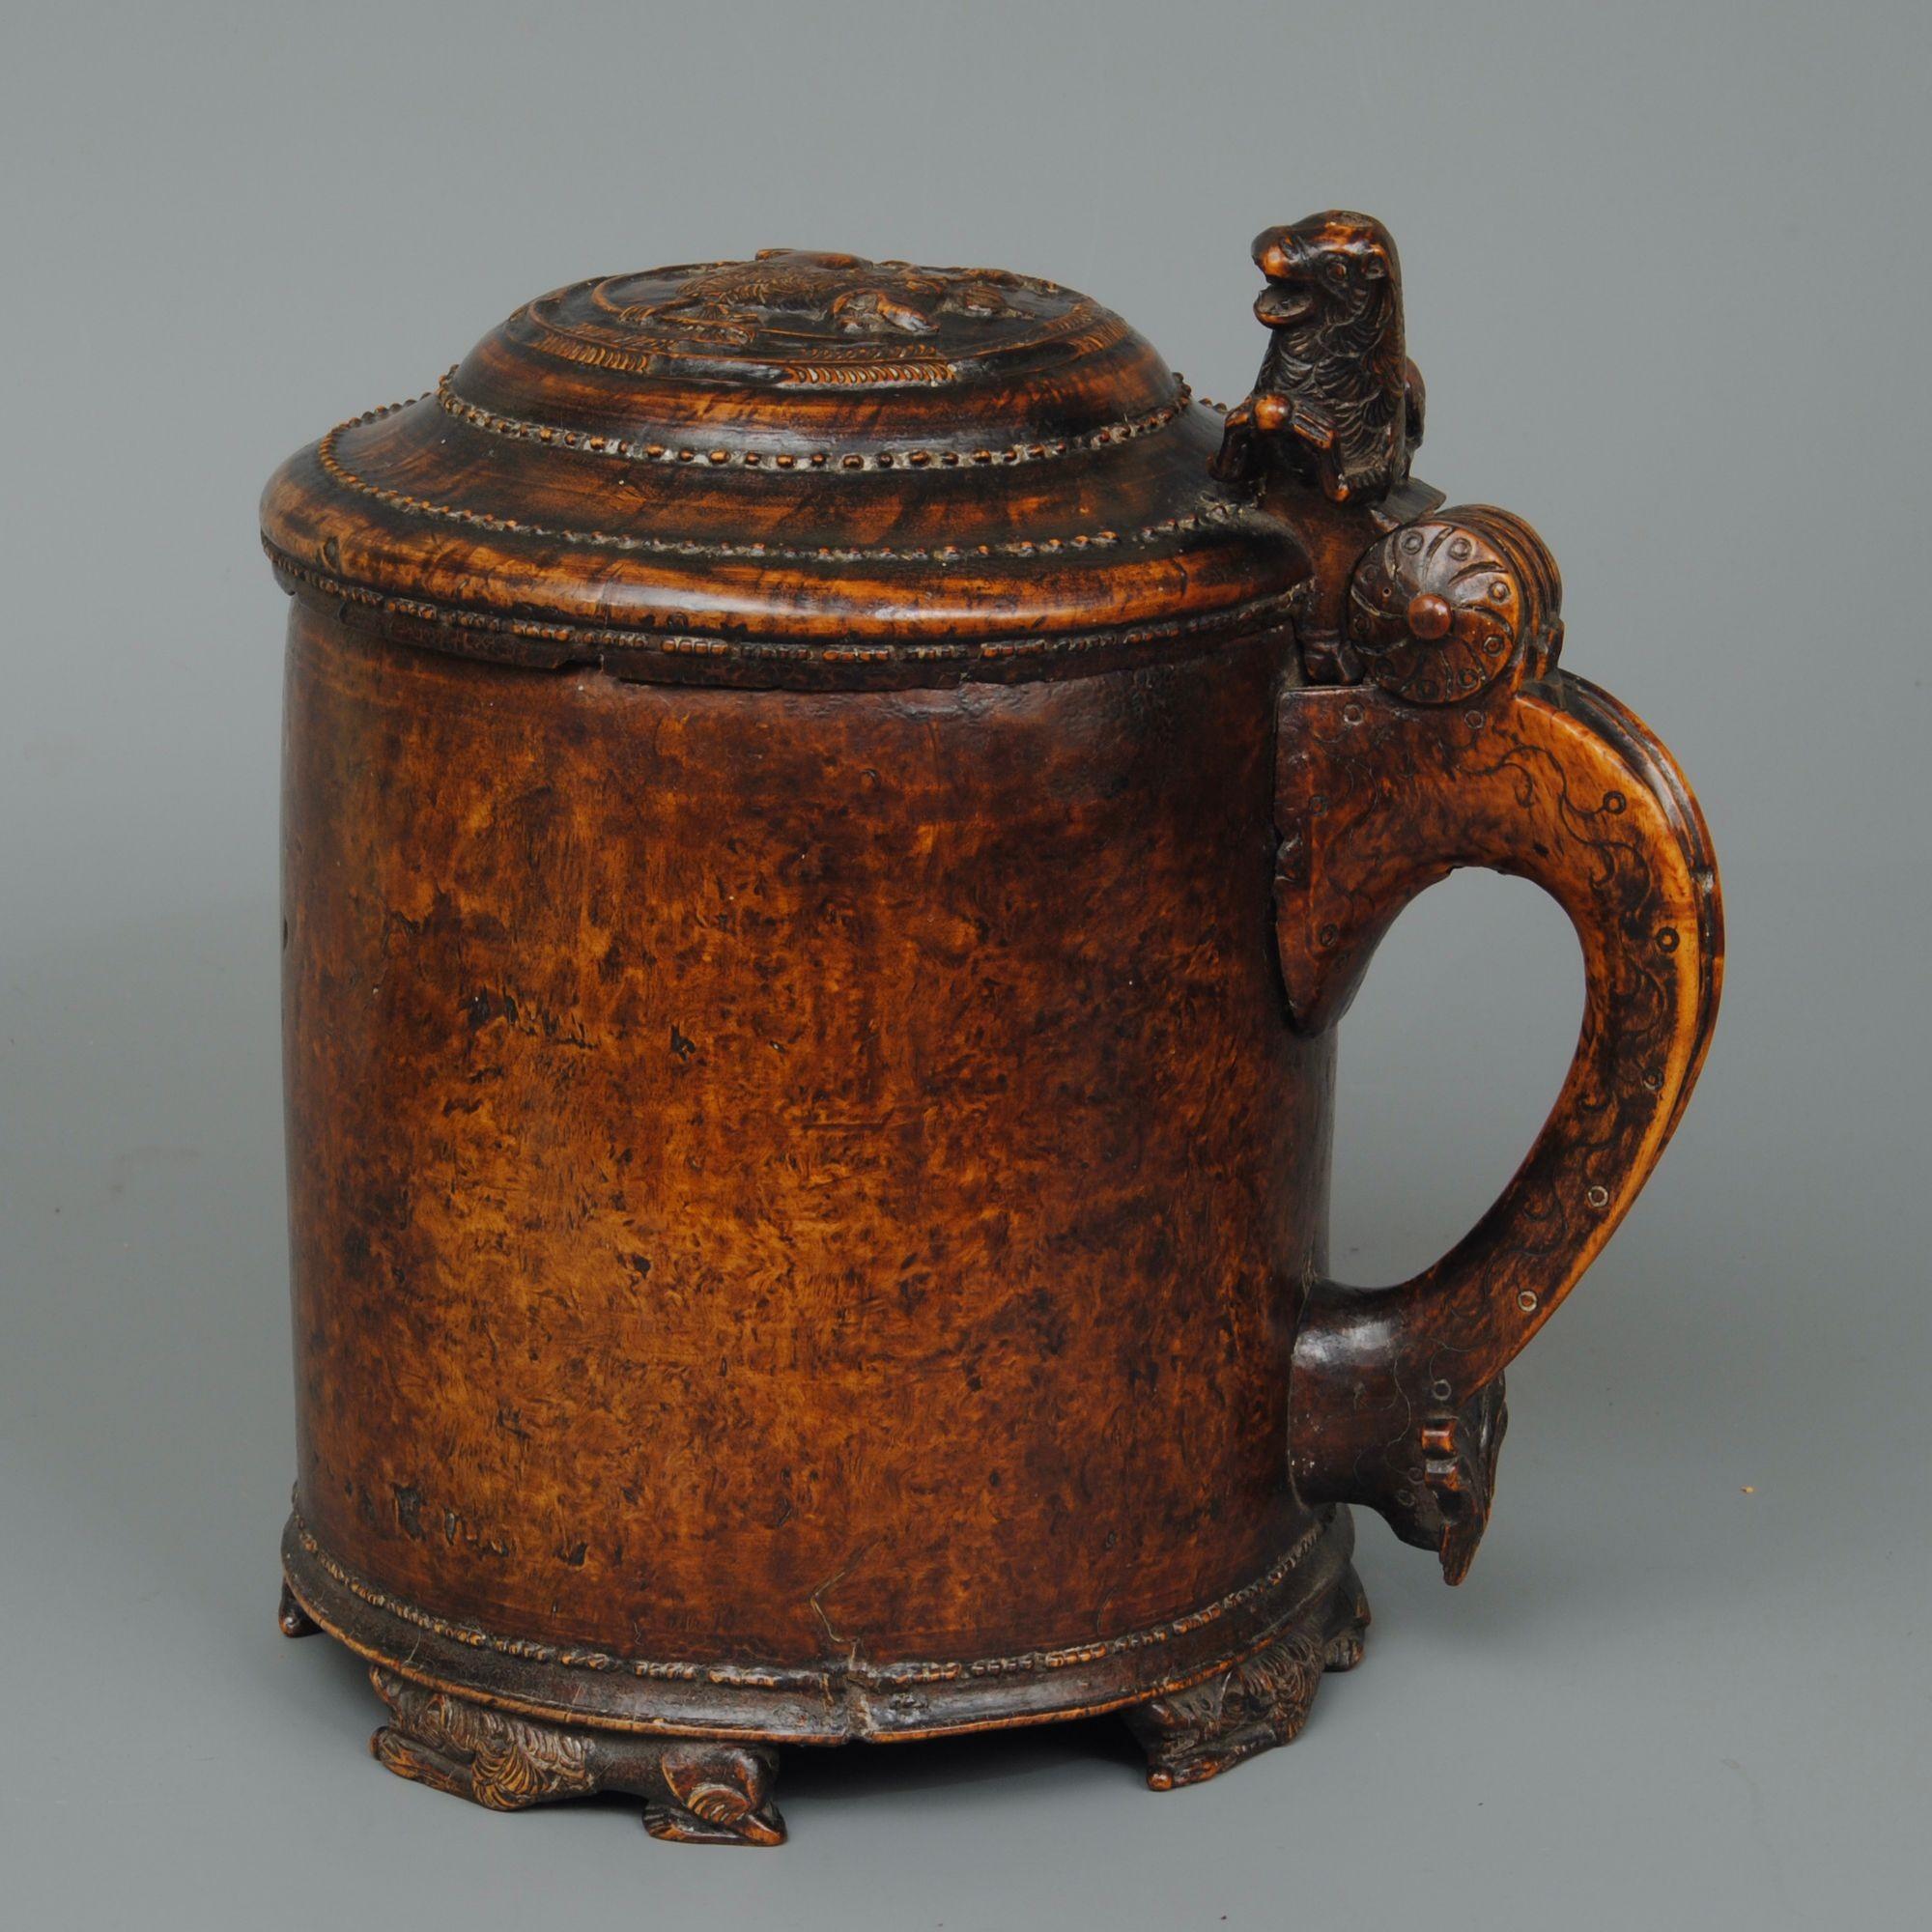 A fine and large 18th century Norwegian burr wood peg tankard with carved Lions on the feet, lid and knob, wonderful colour and patination. Circa 1765.
 

 